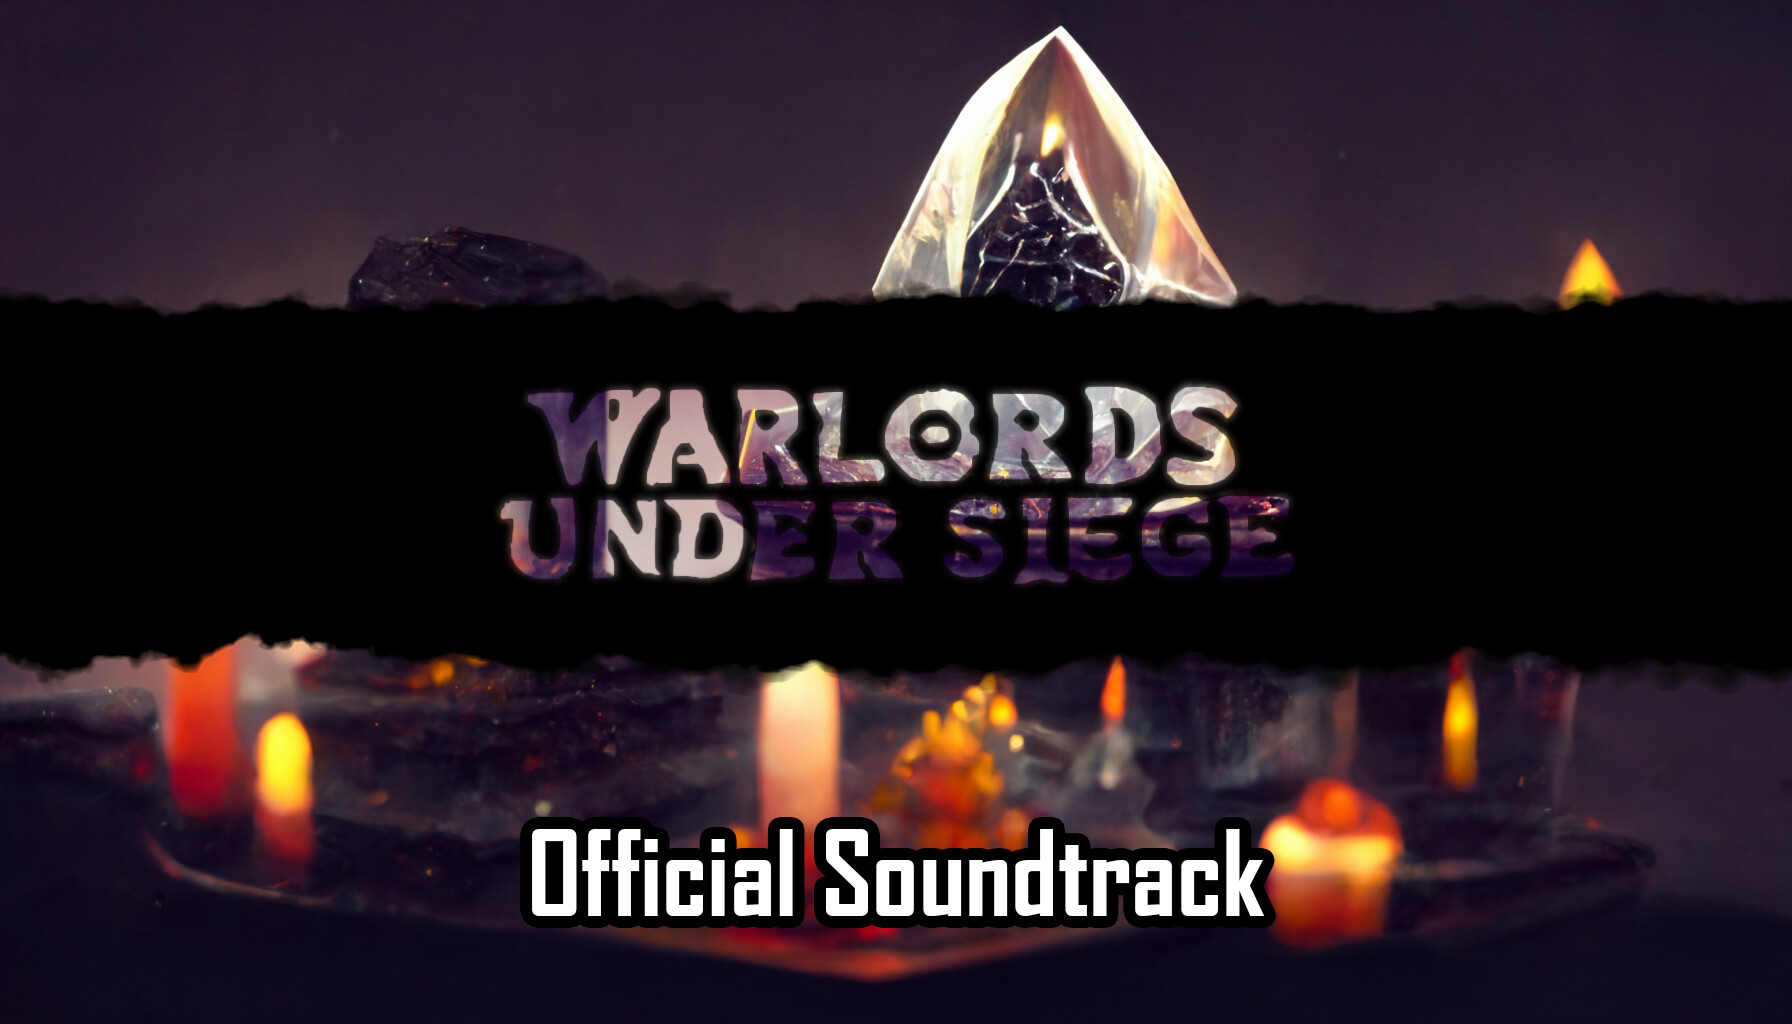 Warlords Under Siege Official Soundtrack Featured Screenshot #1